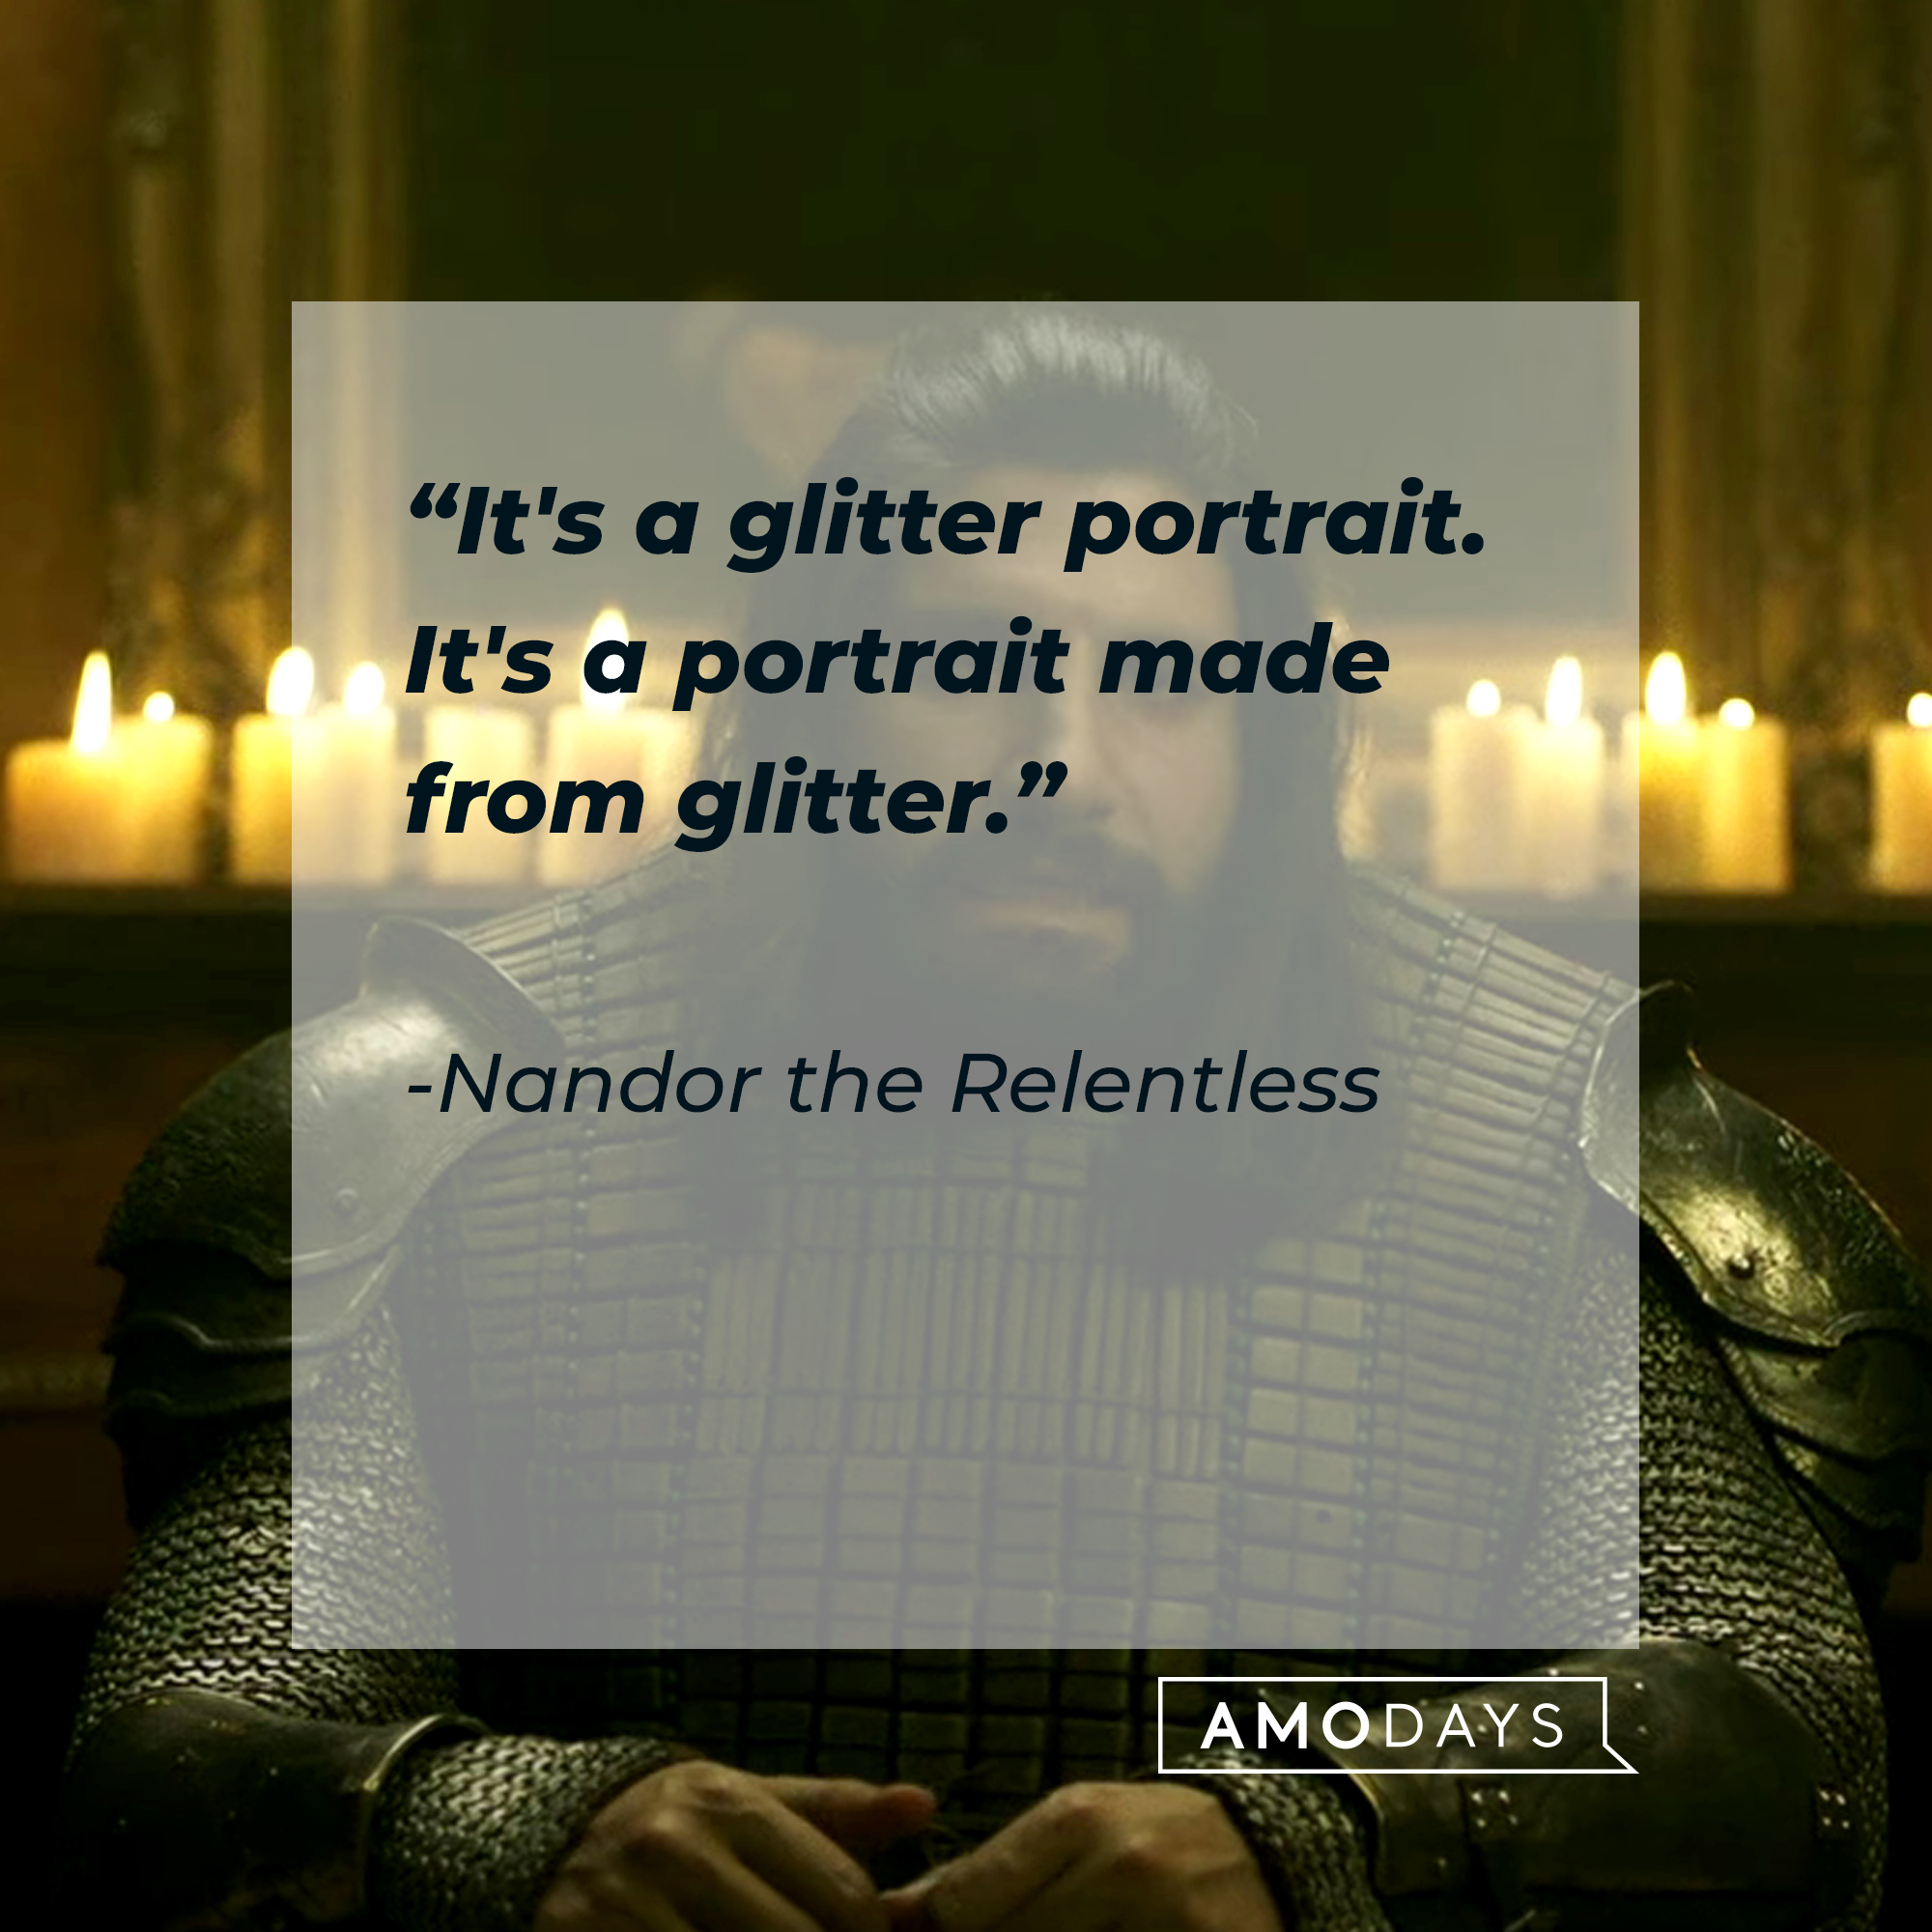 Nandor the Relentless, with his quote: “It's a glitter portrait. It's a portrait made from glitter.” | Source: Facebook.com/TheShadowsFX